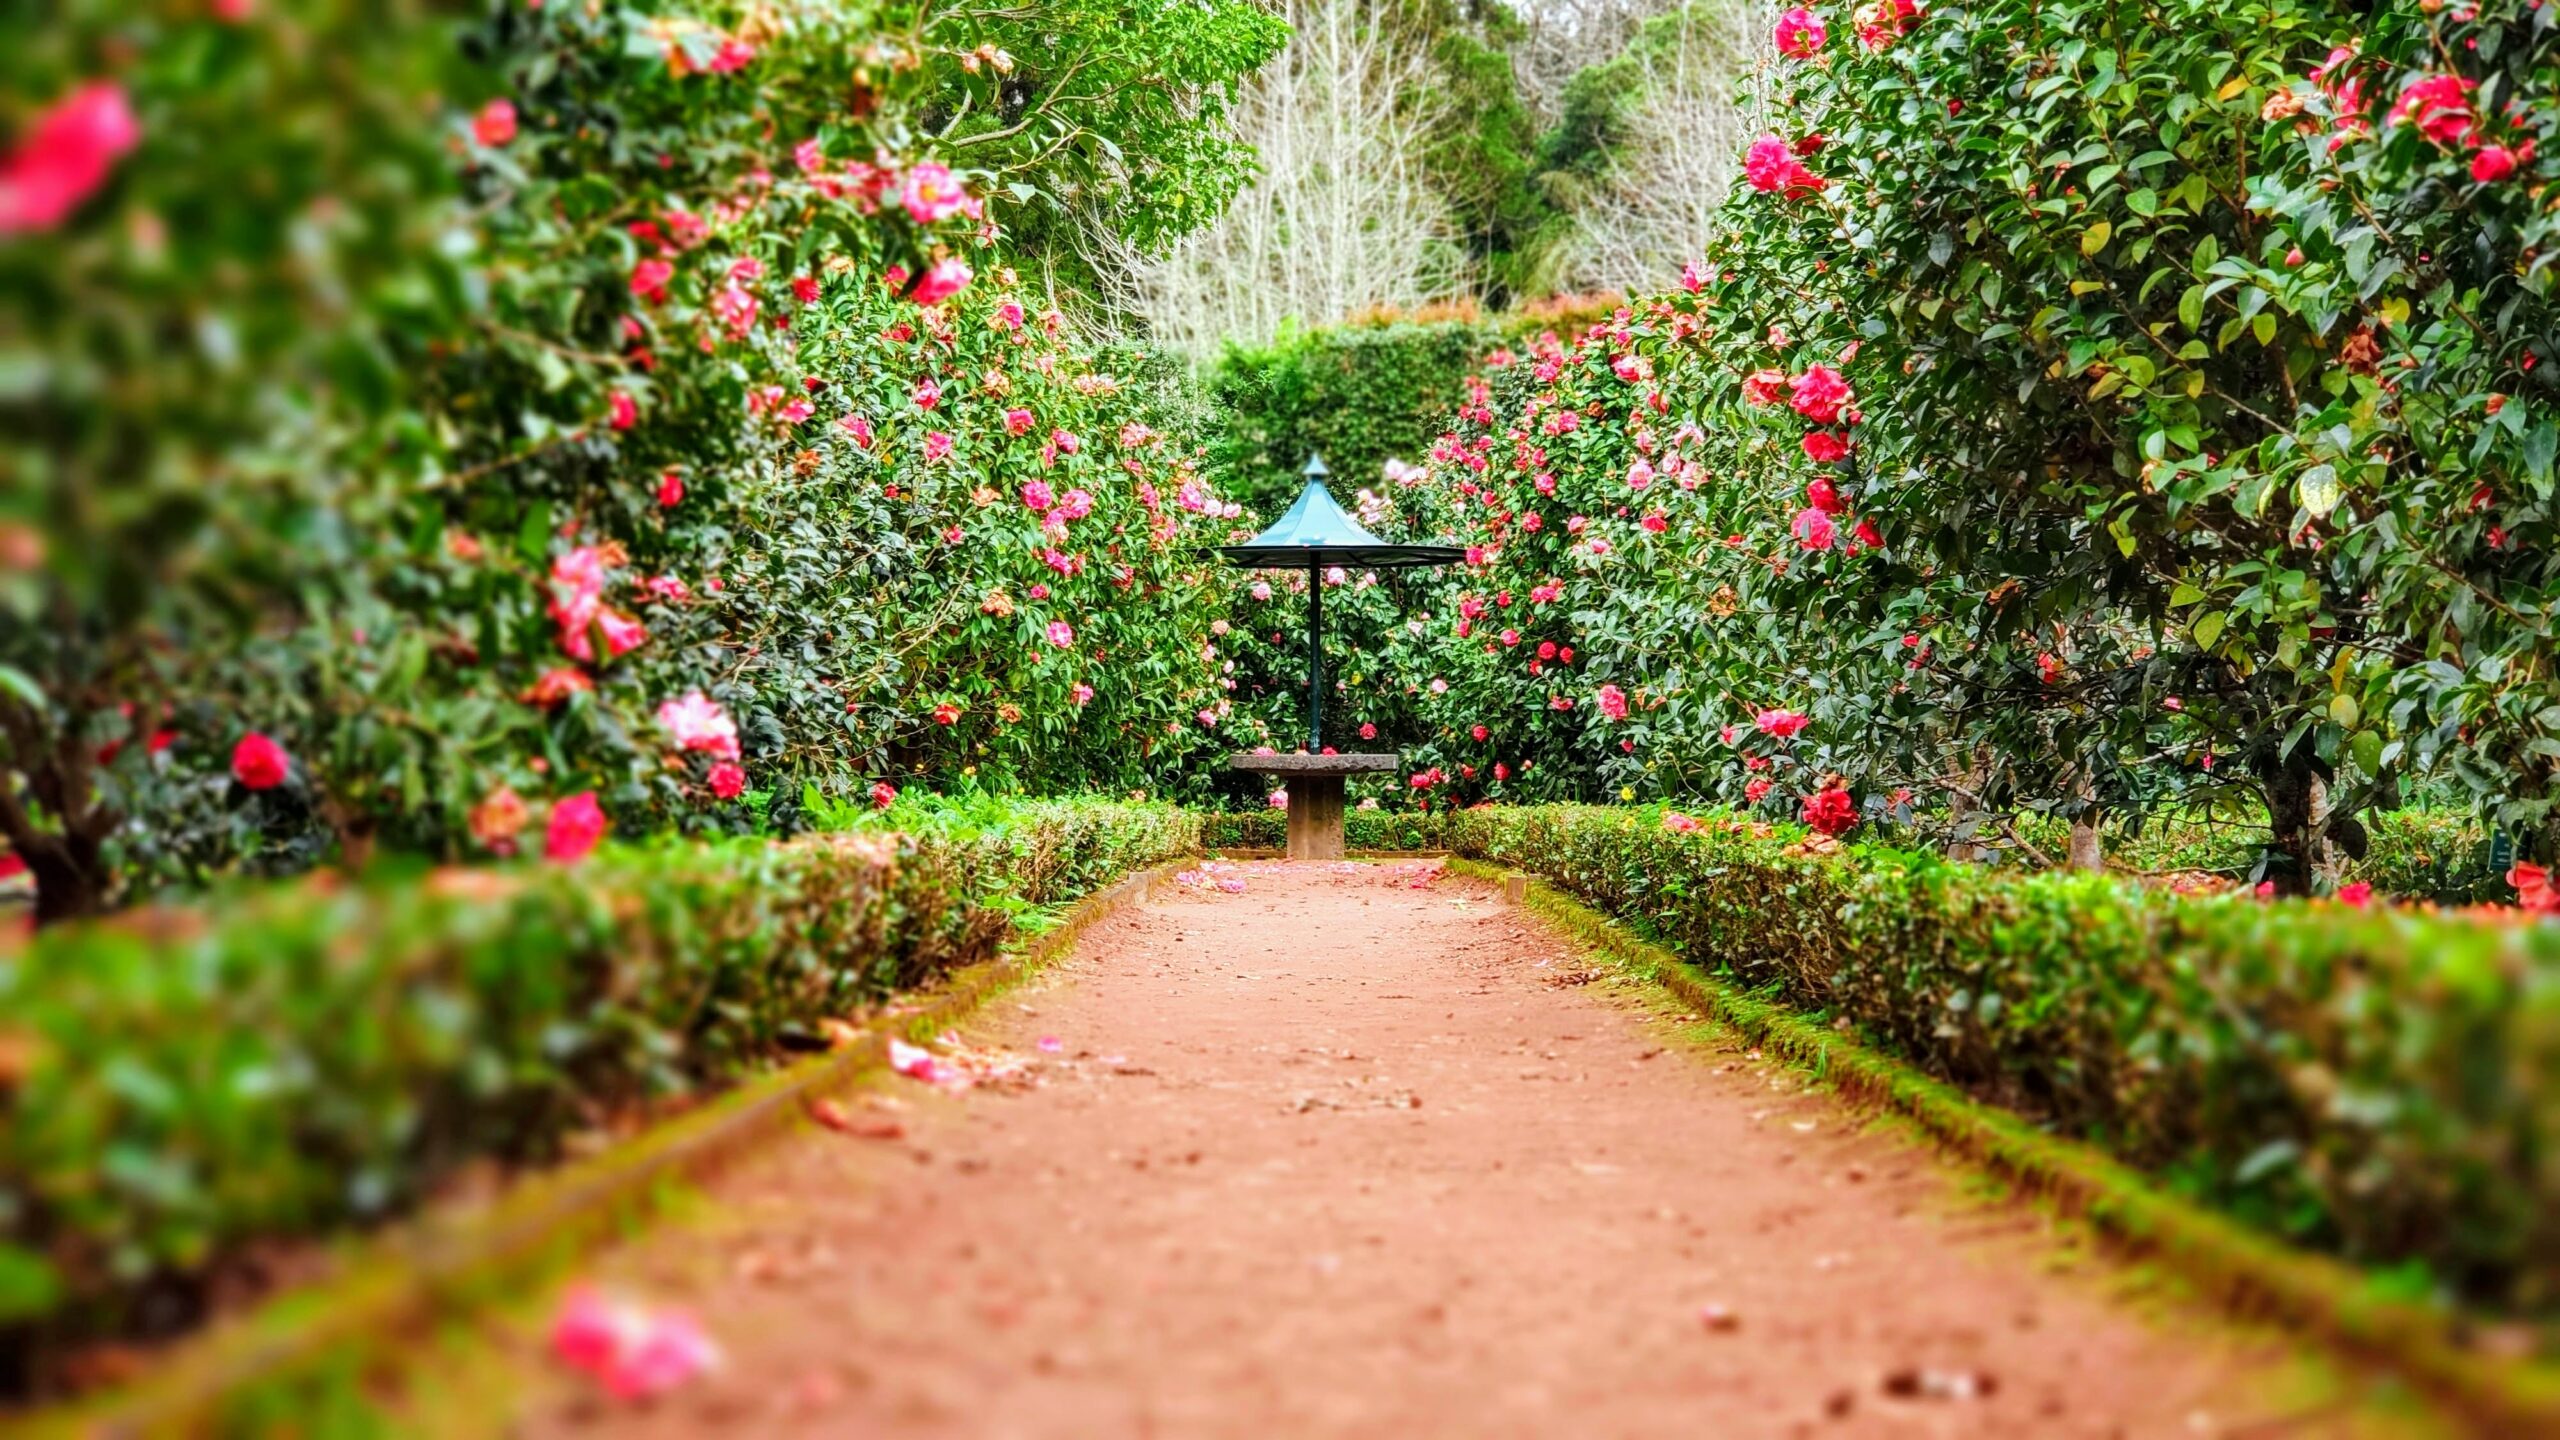 A pathway lined by shrubs and flowers